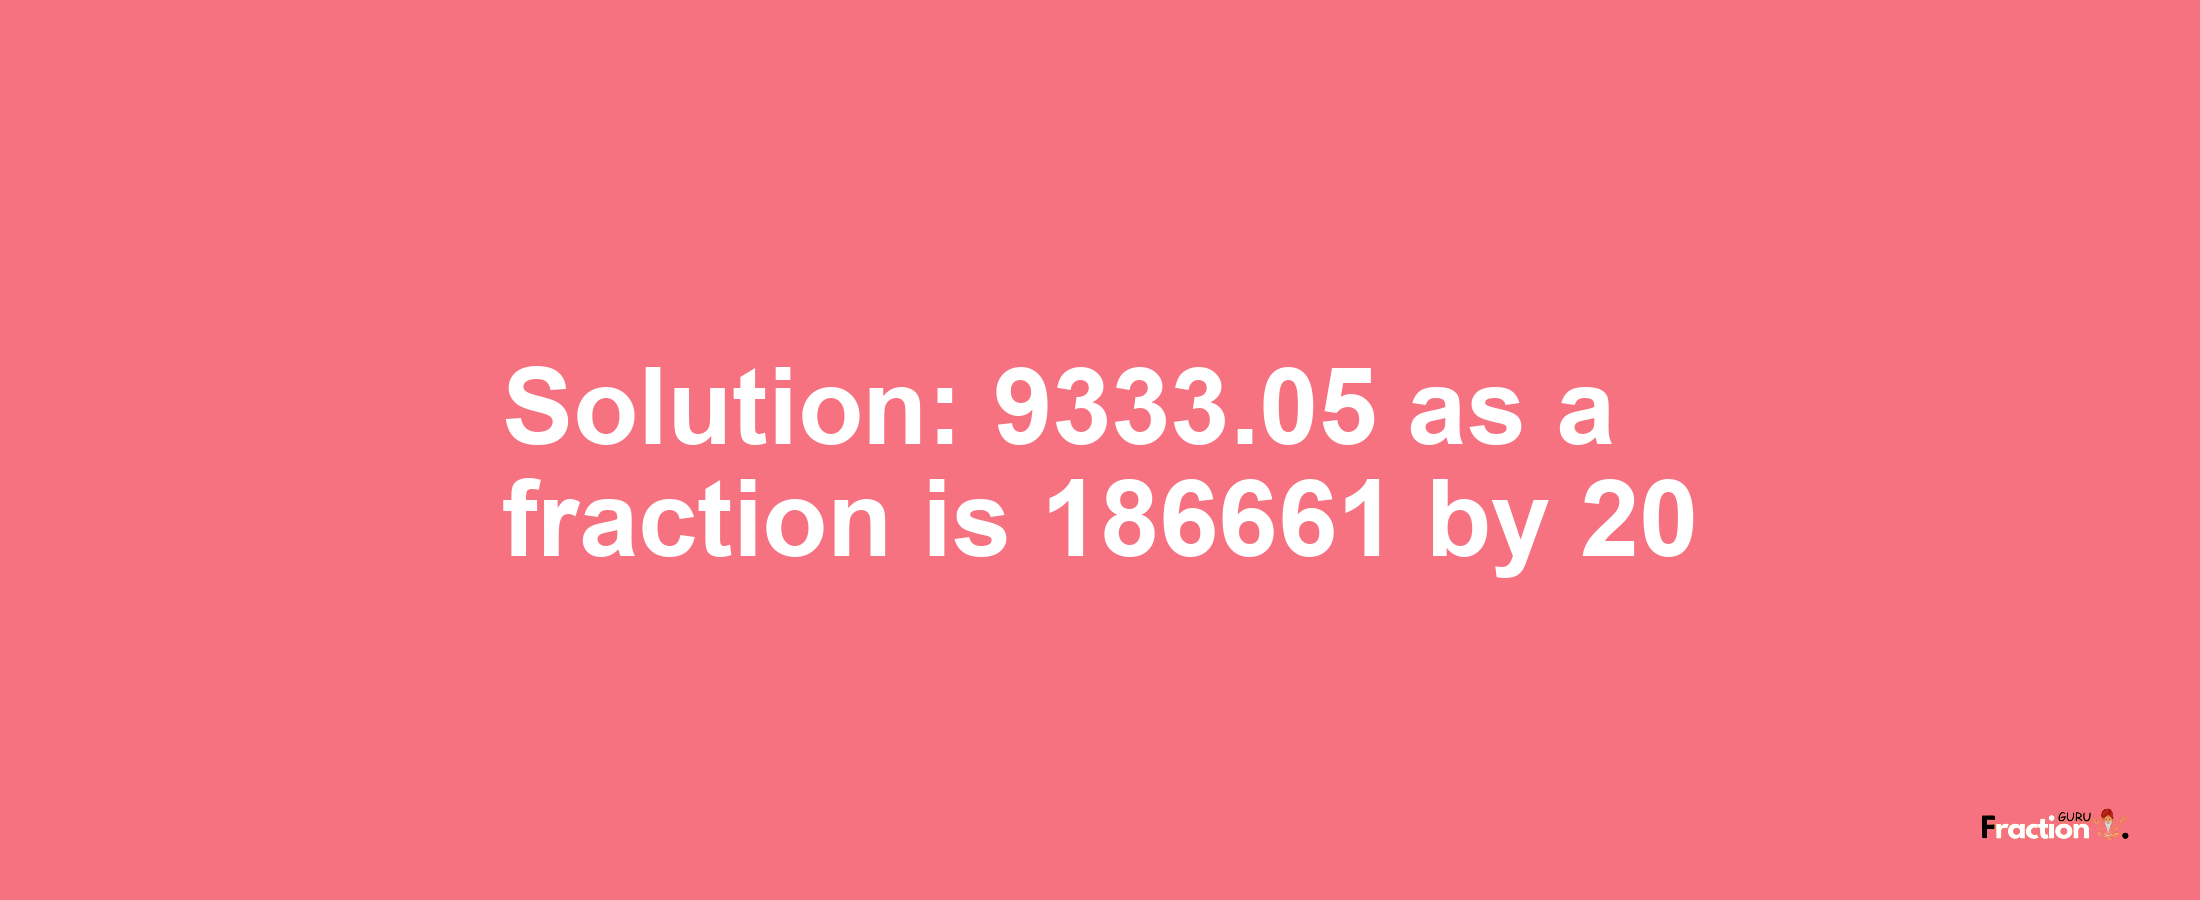 Solution:9333.05 as a fraction is 186661/20